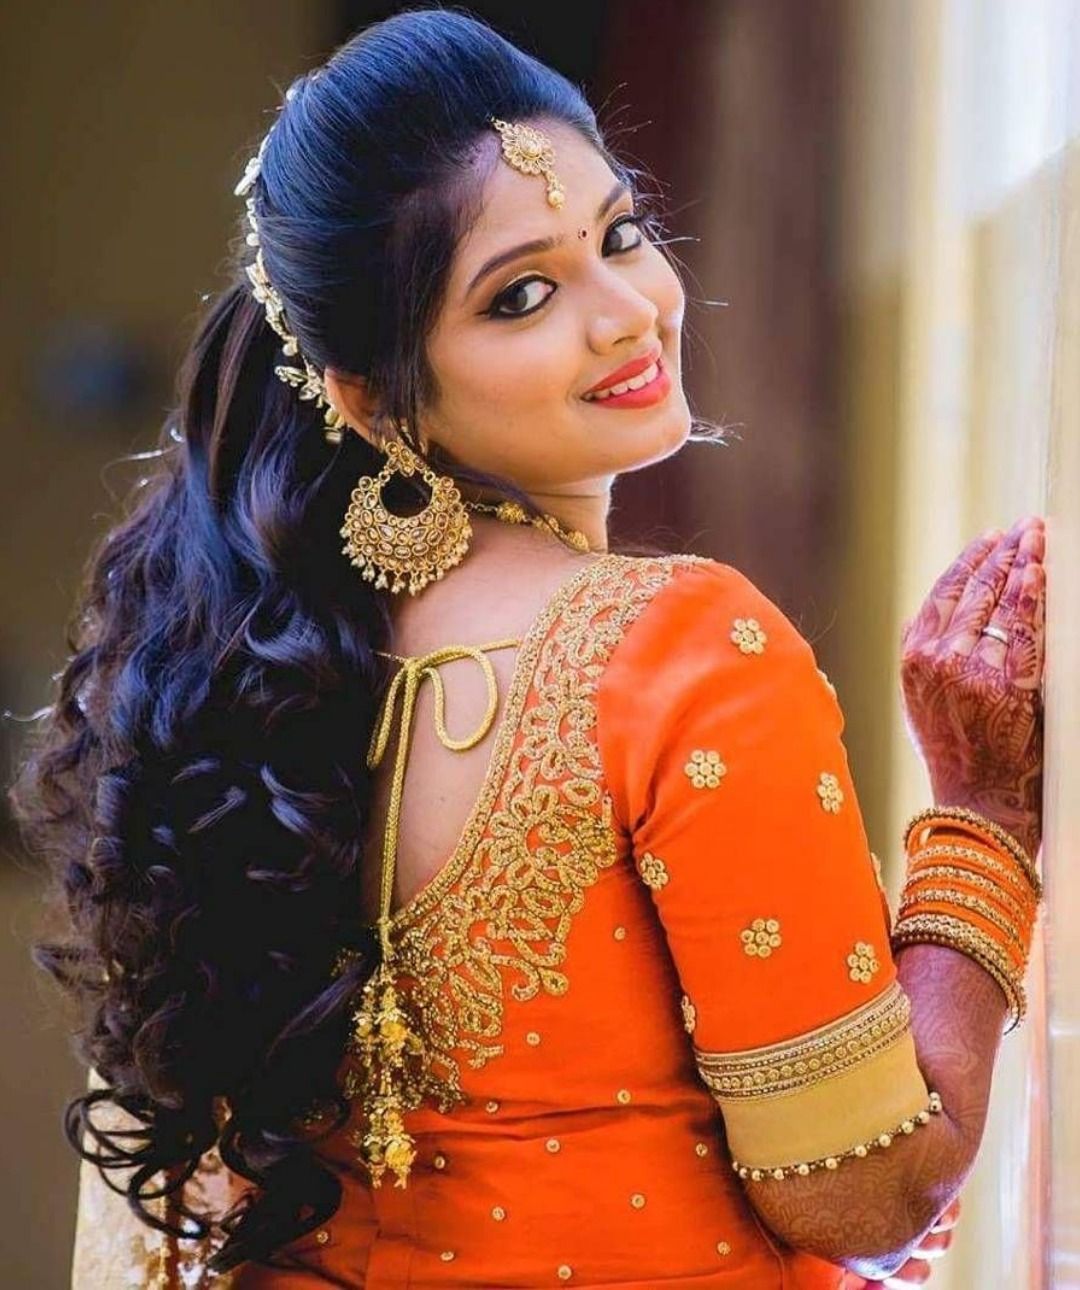 SOUTH INDIAN BRIDAL HAIR STYLES – Divine beauty